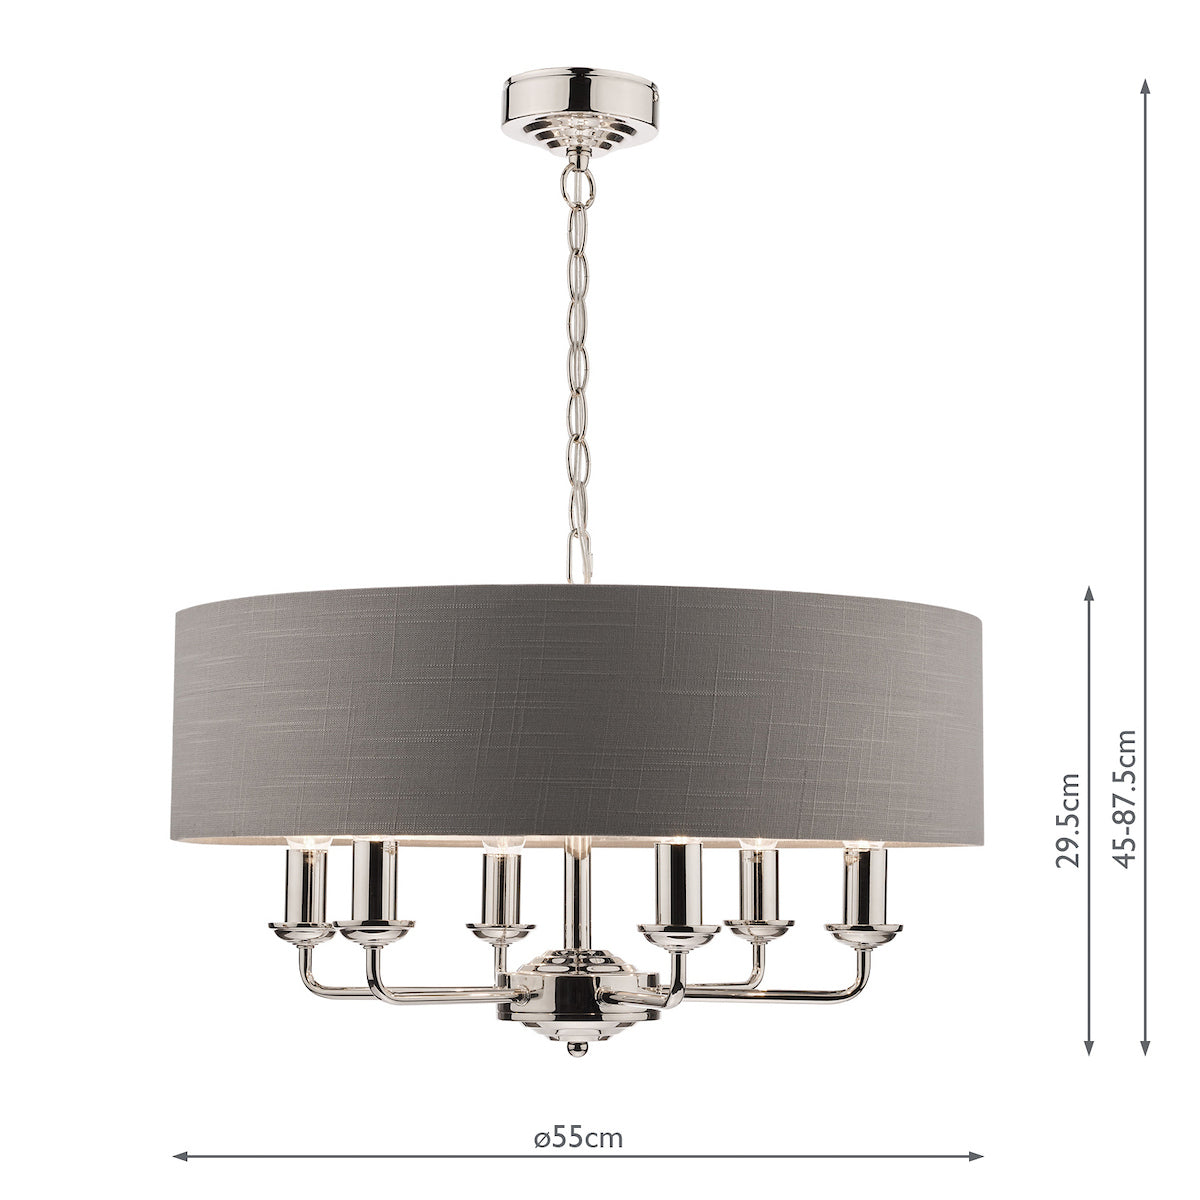 Laura Ashley Sorrento Polished Nickel 6 Light LA3668938-Q  Armed Fitting Ceiling Light with Charcoal Shade